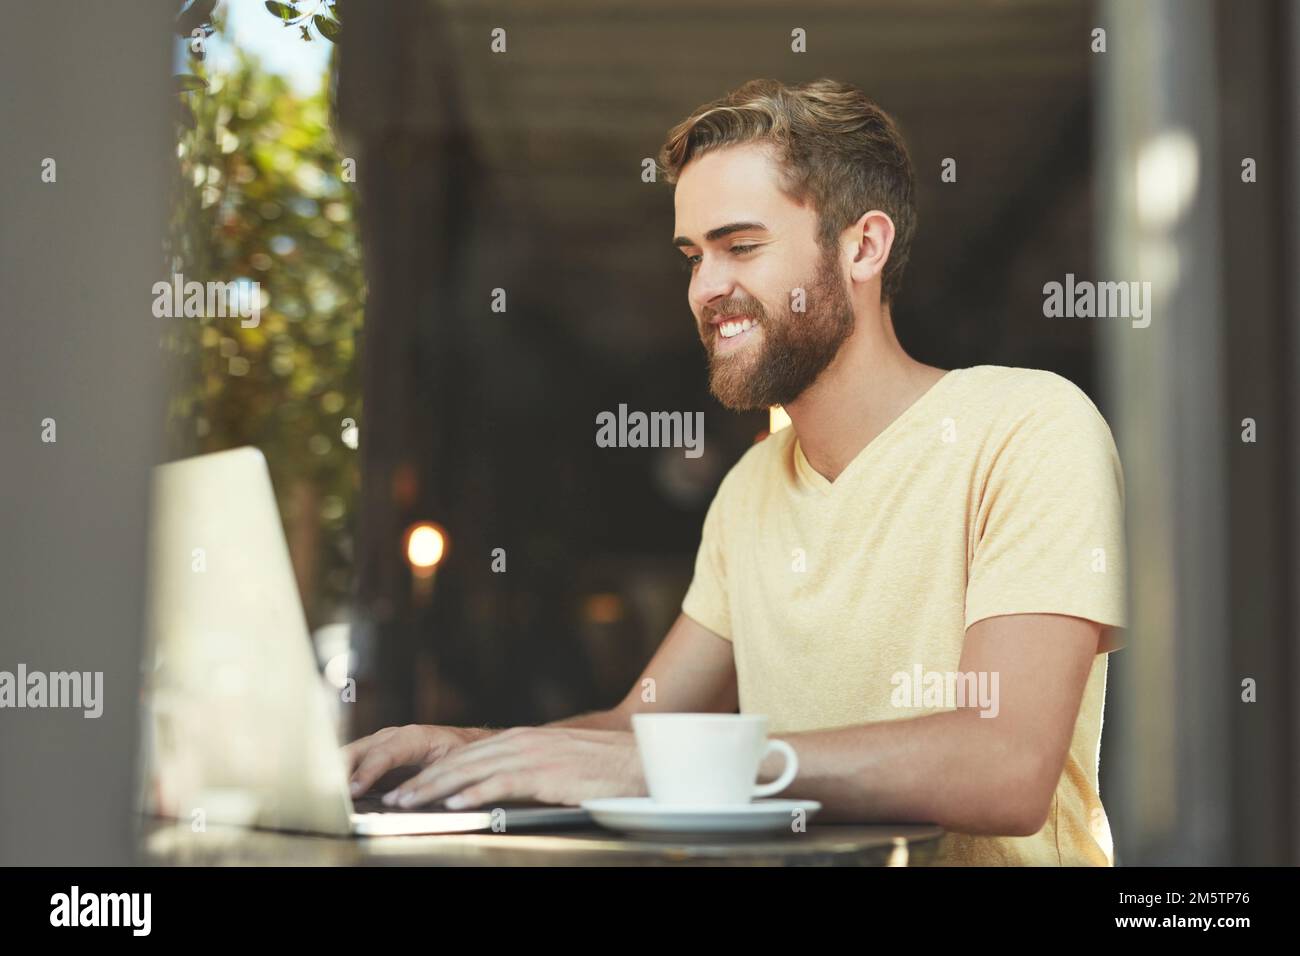 Coffee gets his thoughts flowing. a young man using a laptop in a cafe. Stock Photo